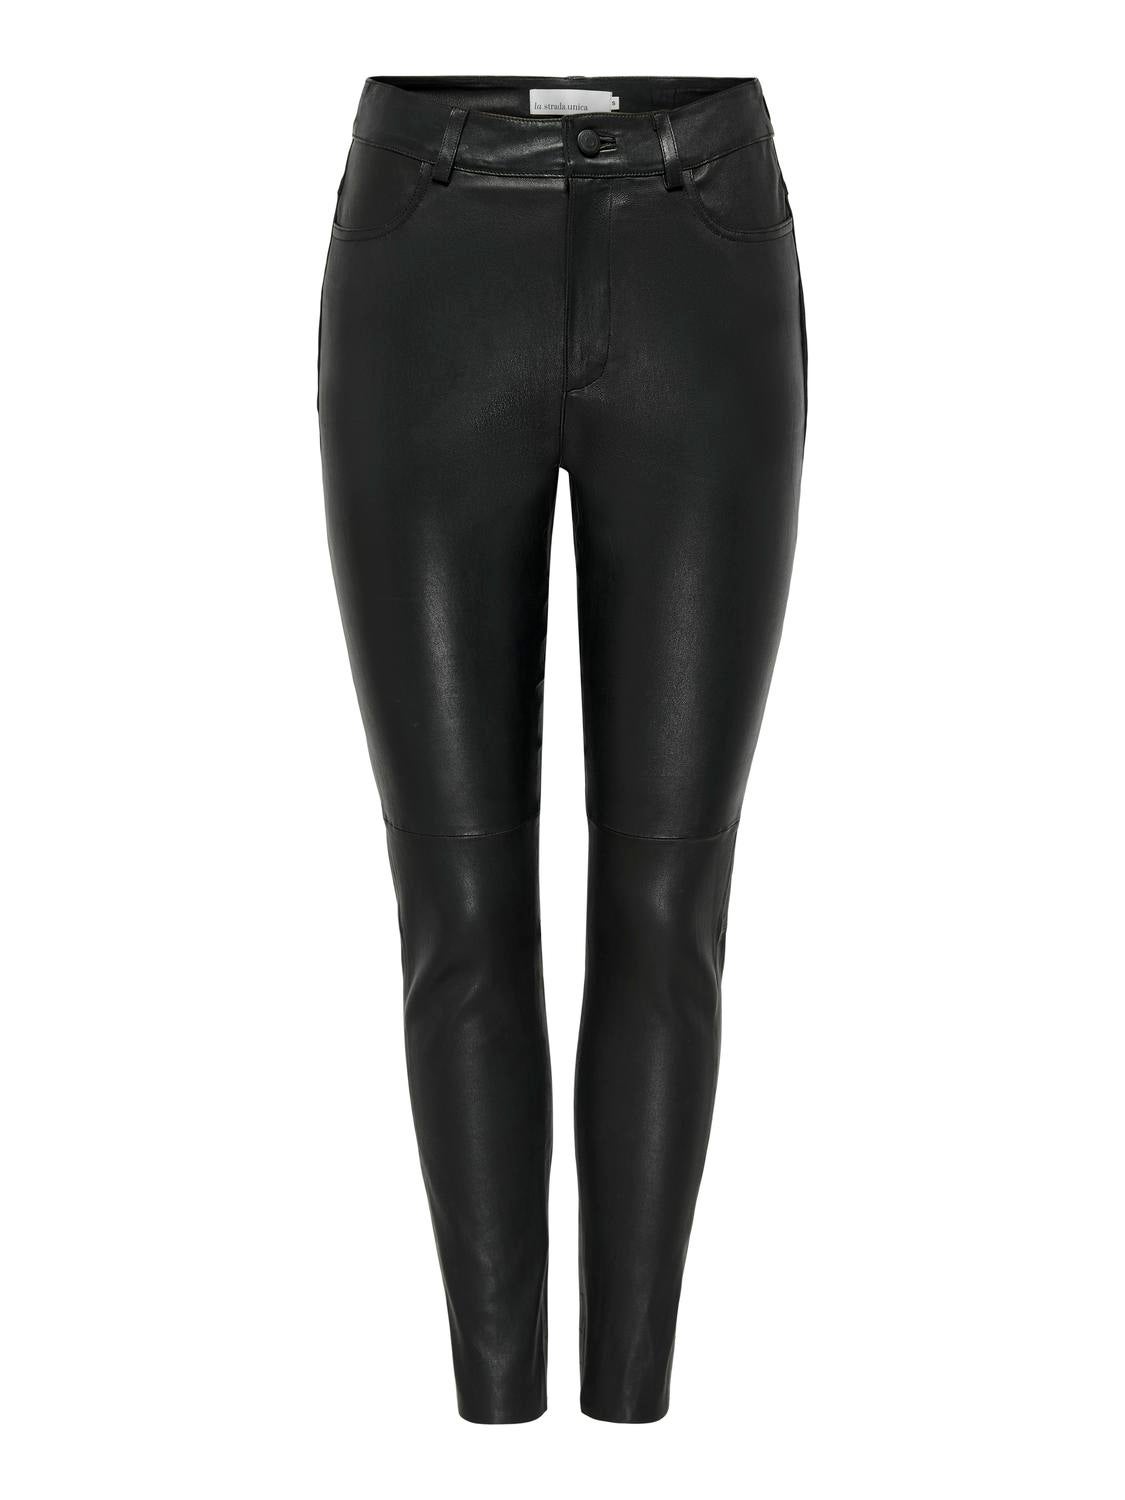 Buy Exclusive Topshop Leather Trousers  66 products  FASHIOLAin